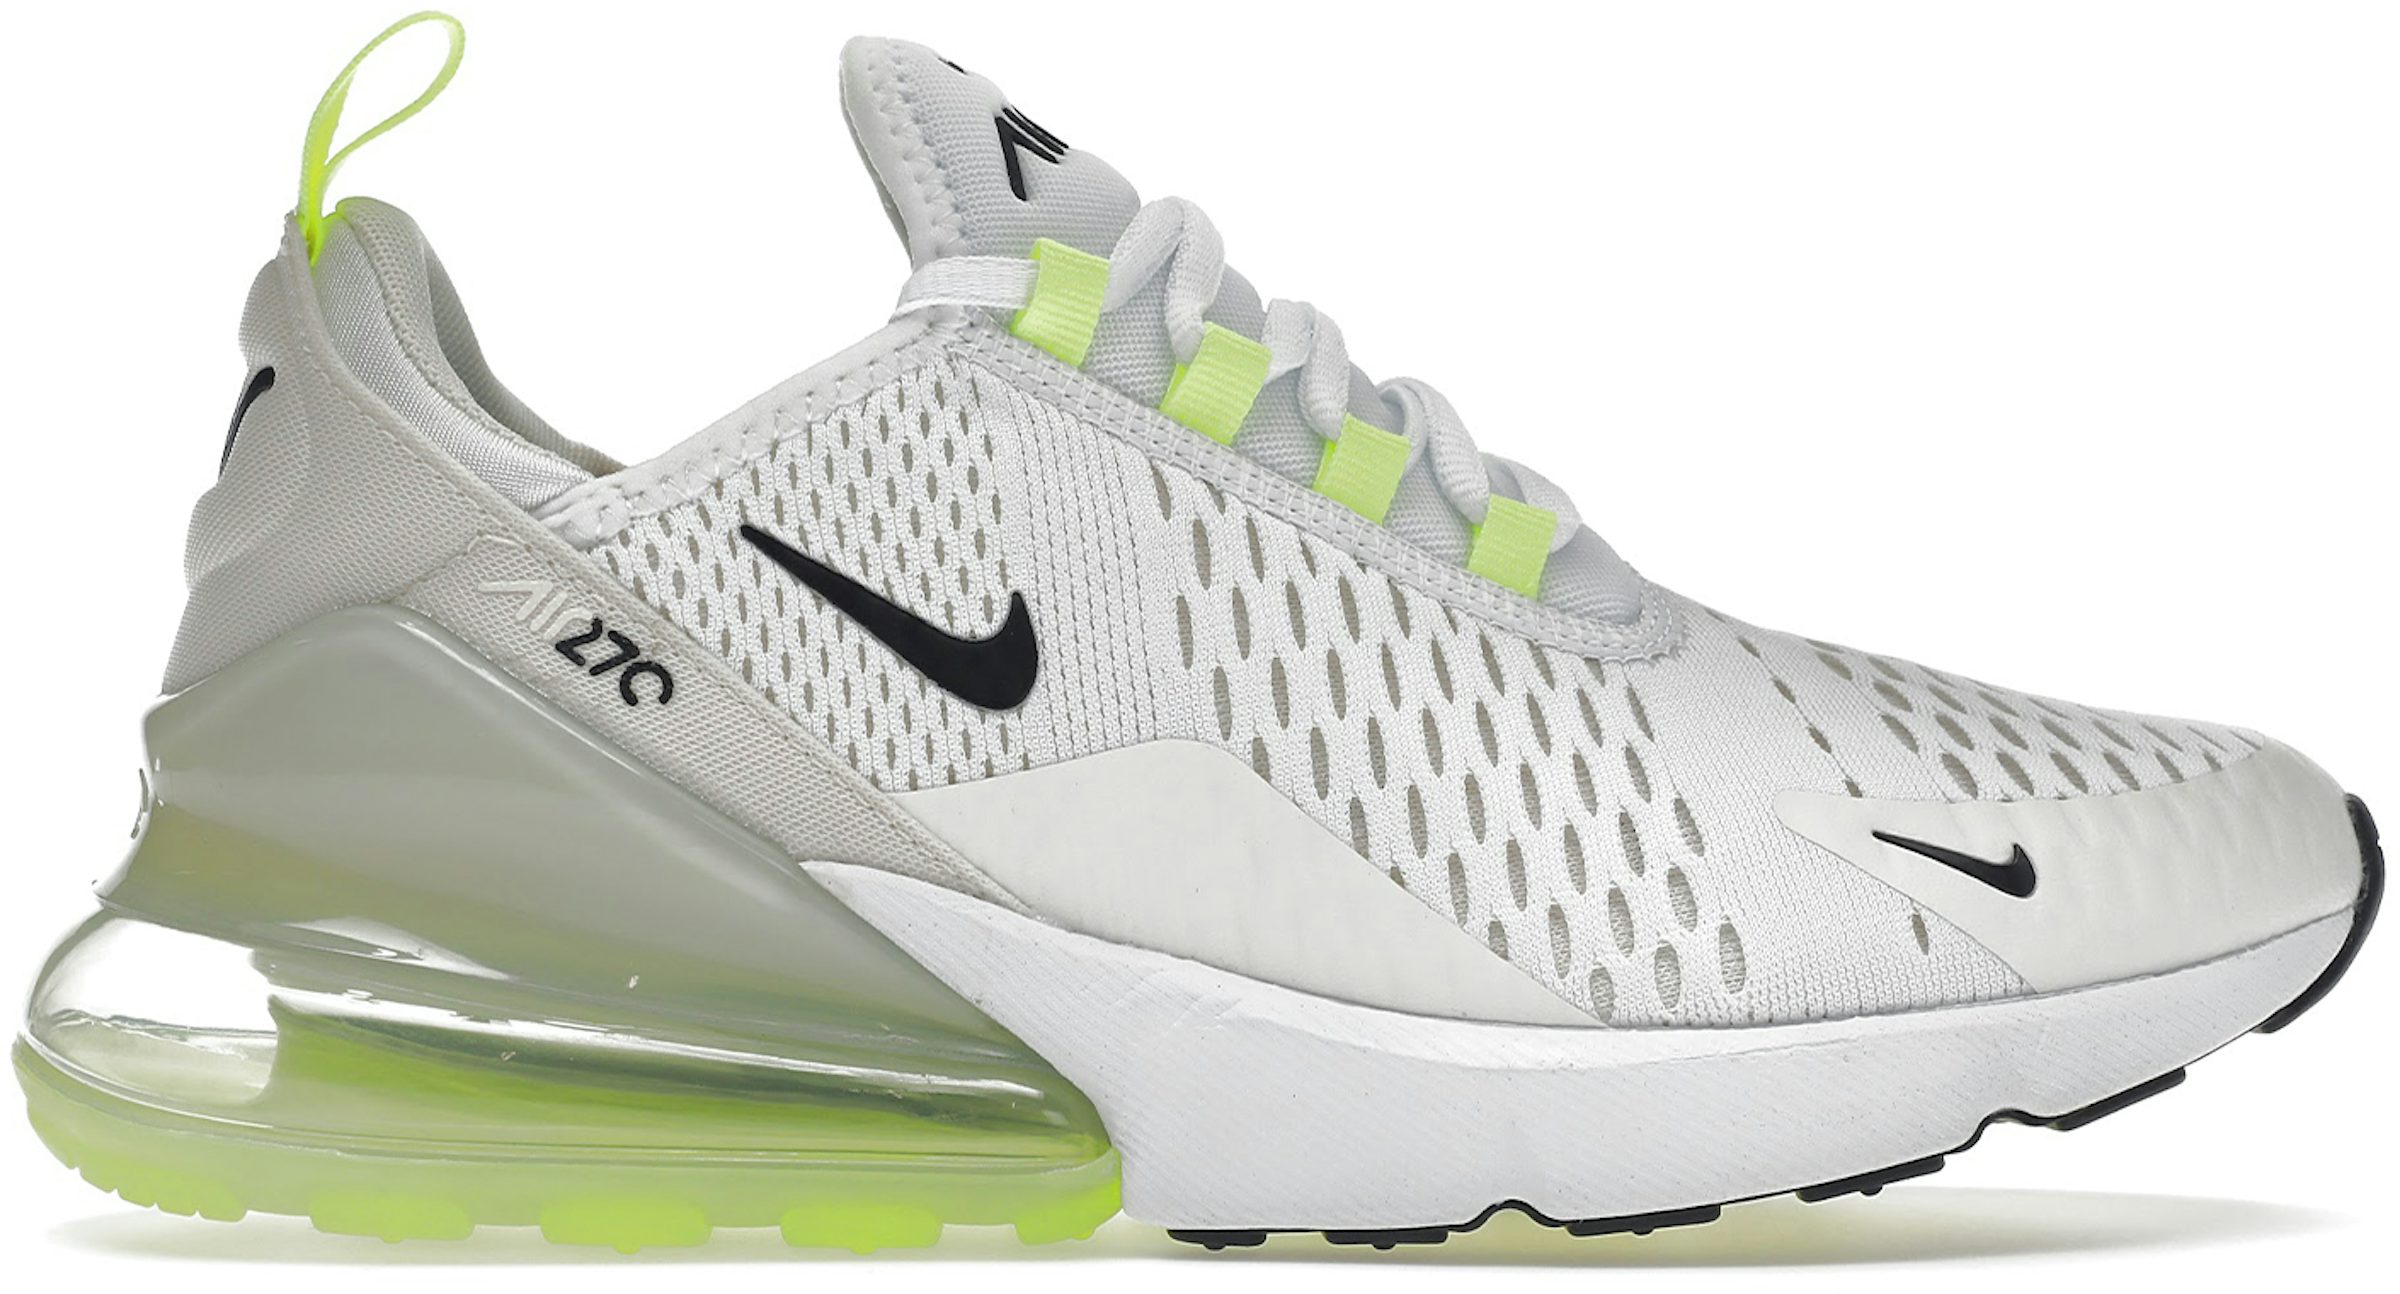 Buy Nike Air Max 270 Shoes & New Sneakers - StockX